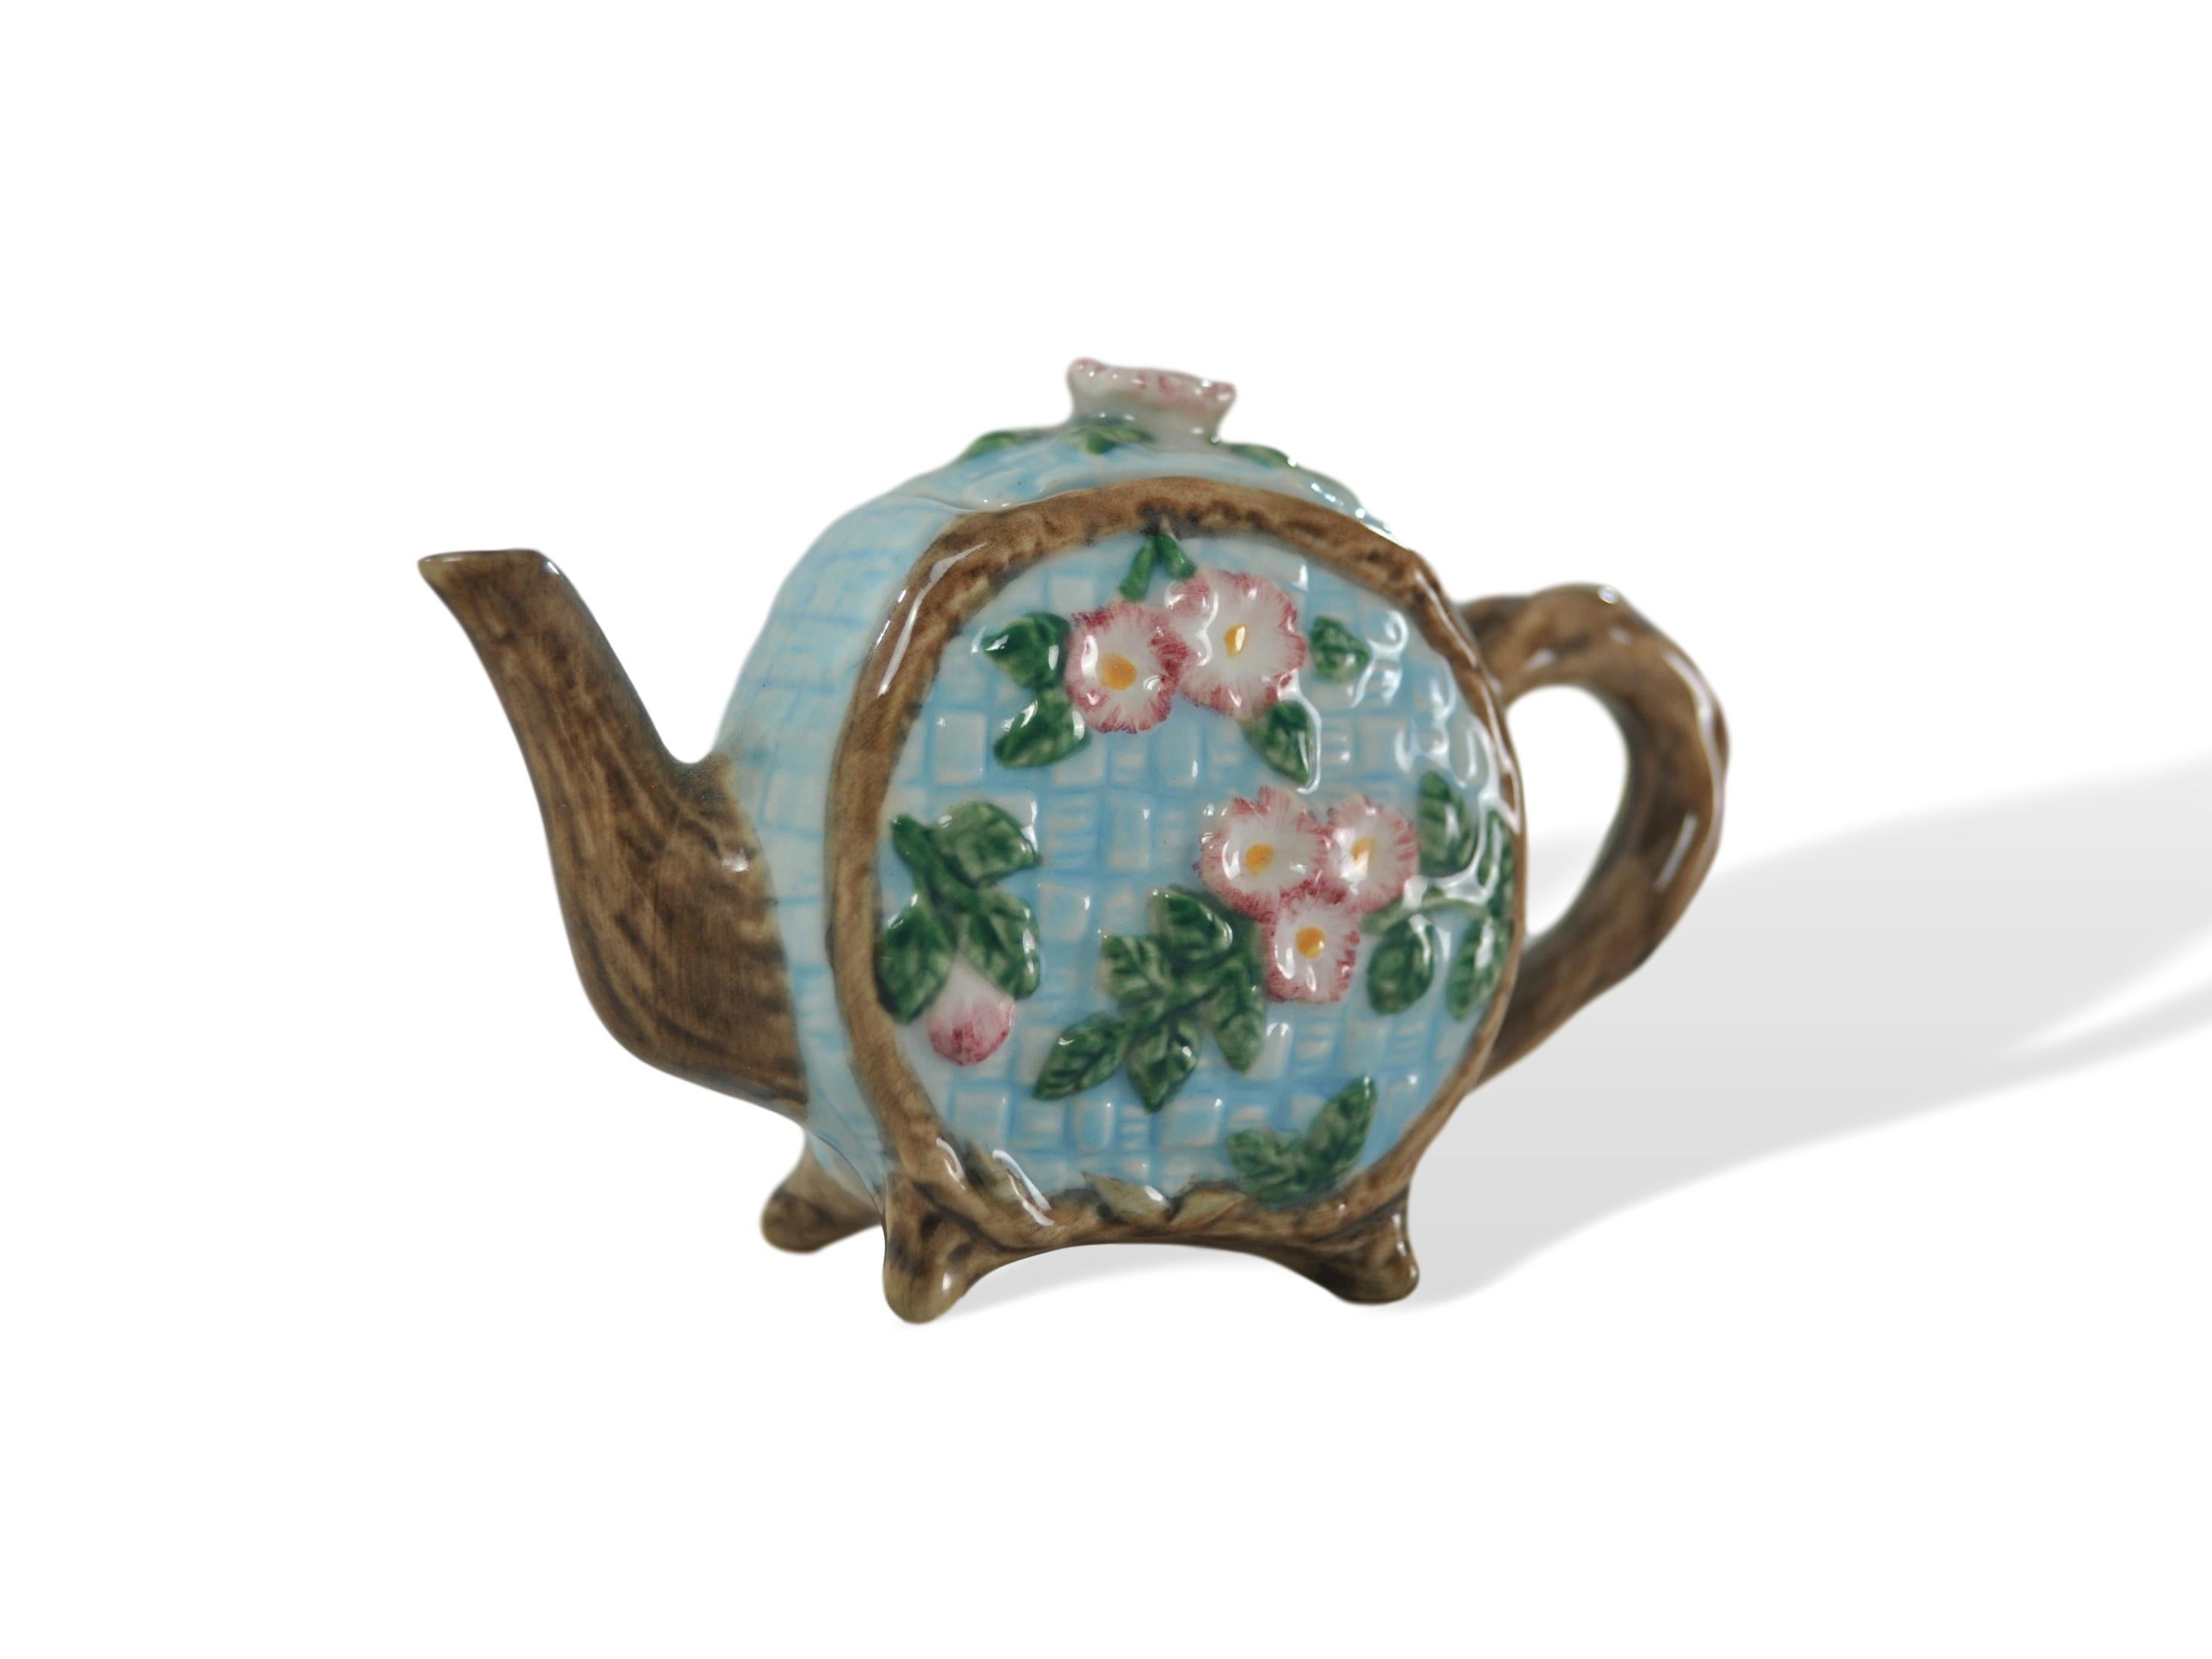 Miniature Majolica teapot, English, circa 1920.
For over 28 years we have been among the nation's preeminent specialists in fine antique majolica.